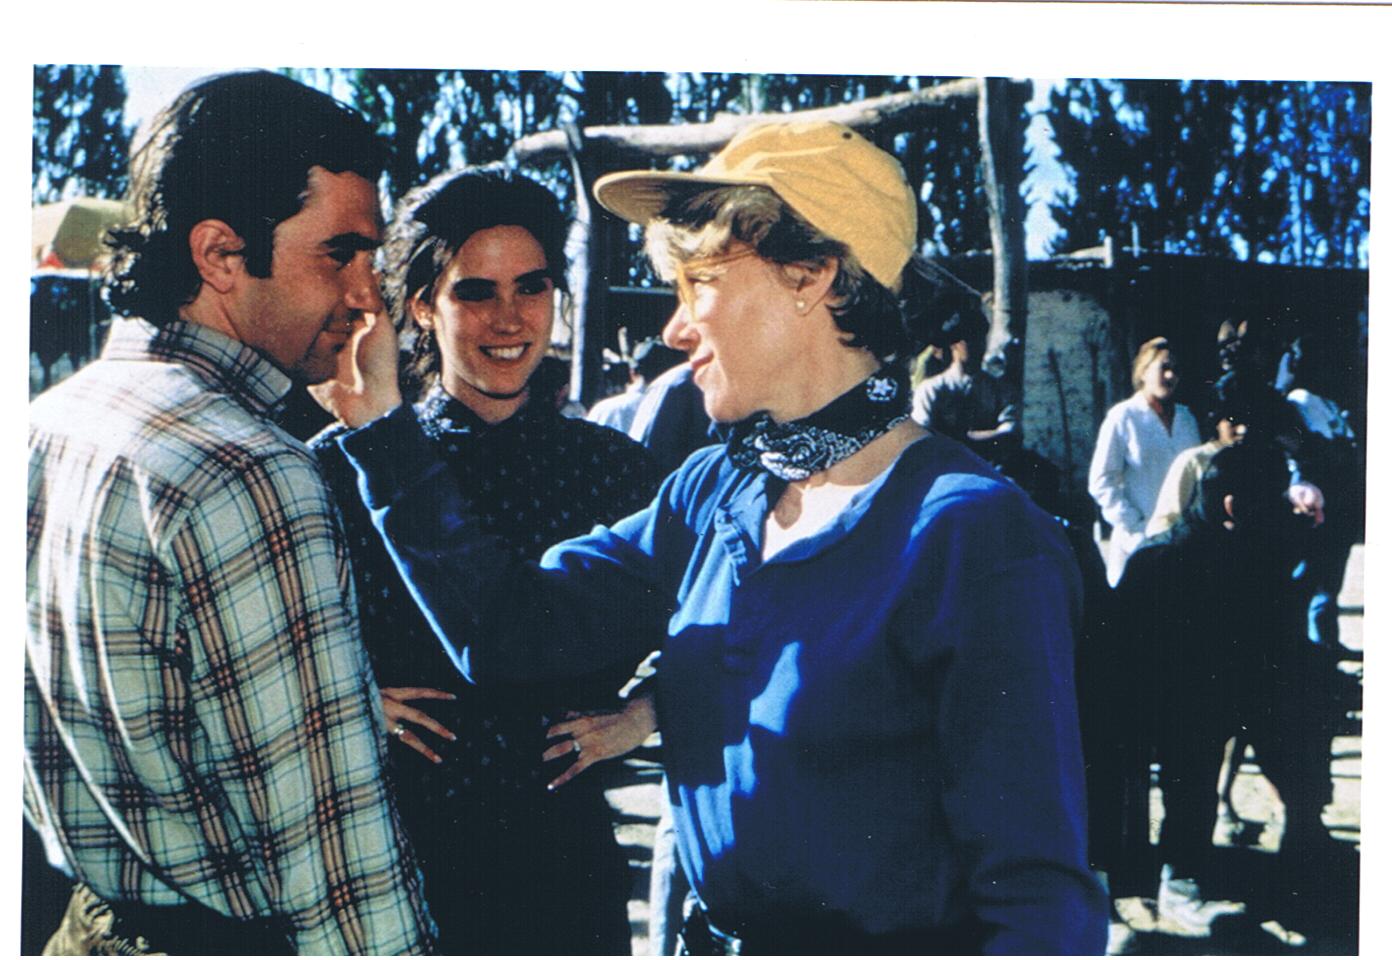 Betty Kaplan directing Antonio Banderas and Jennifer Connelly in OF LOVE AND SHADOWS.